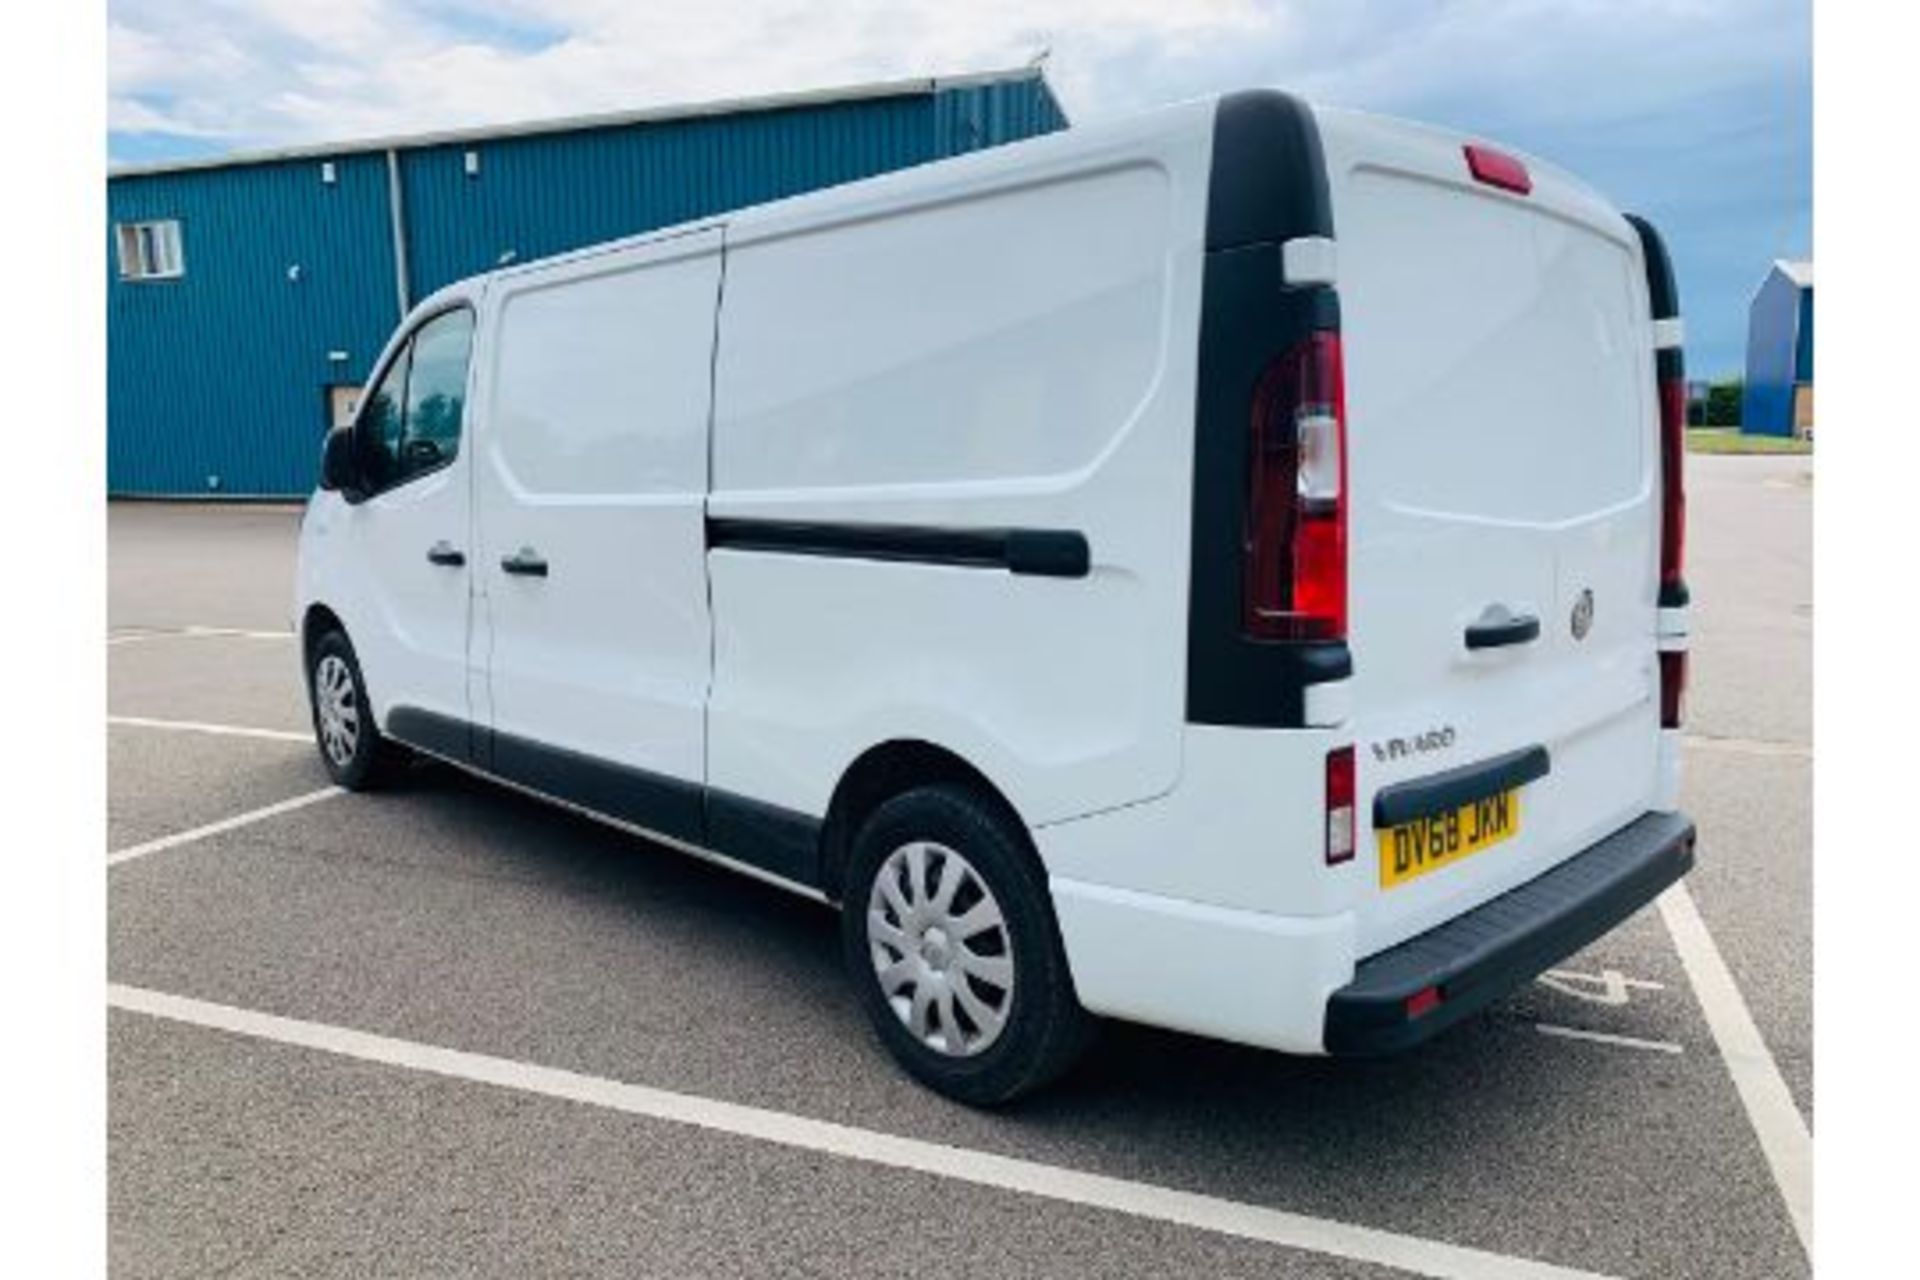 Vauxhall Vivaro 2900 1.6 CDTI Sportive - 2019 Model - 6 Speed - Air Con - Cruise - ONLY 25K Miles - Image 2 of 24